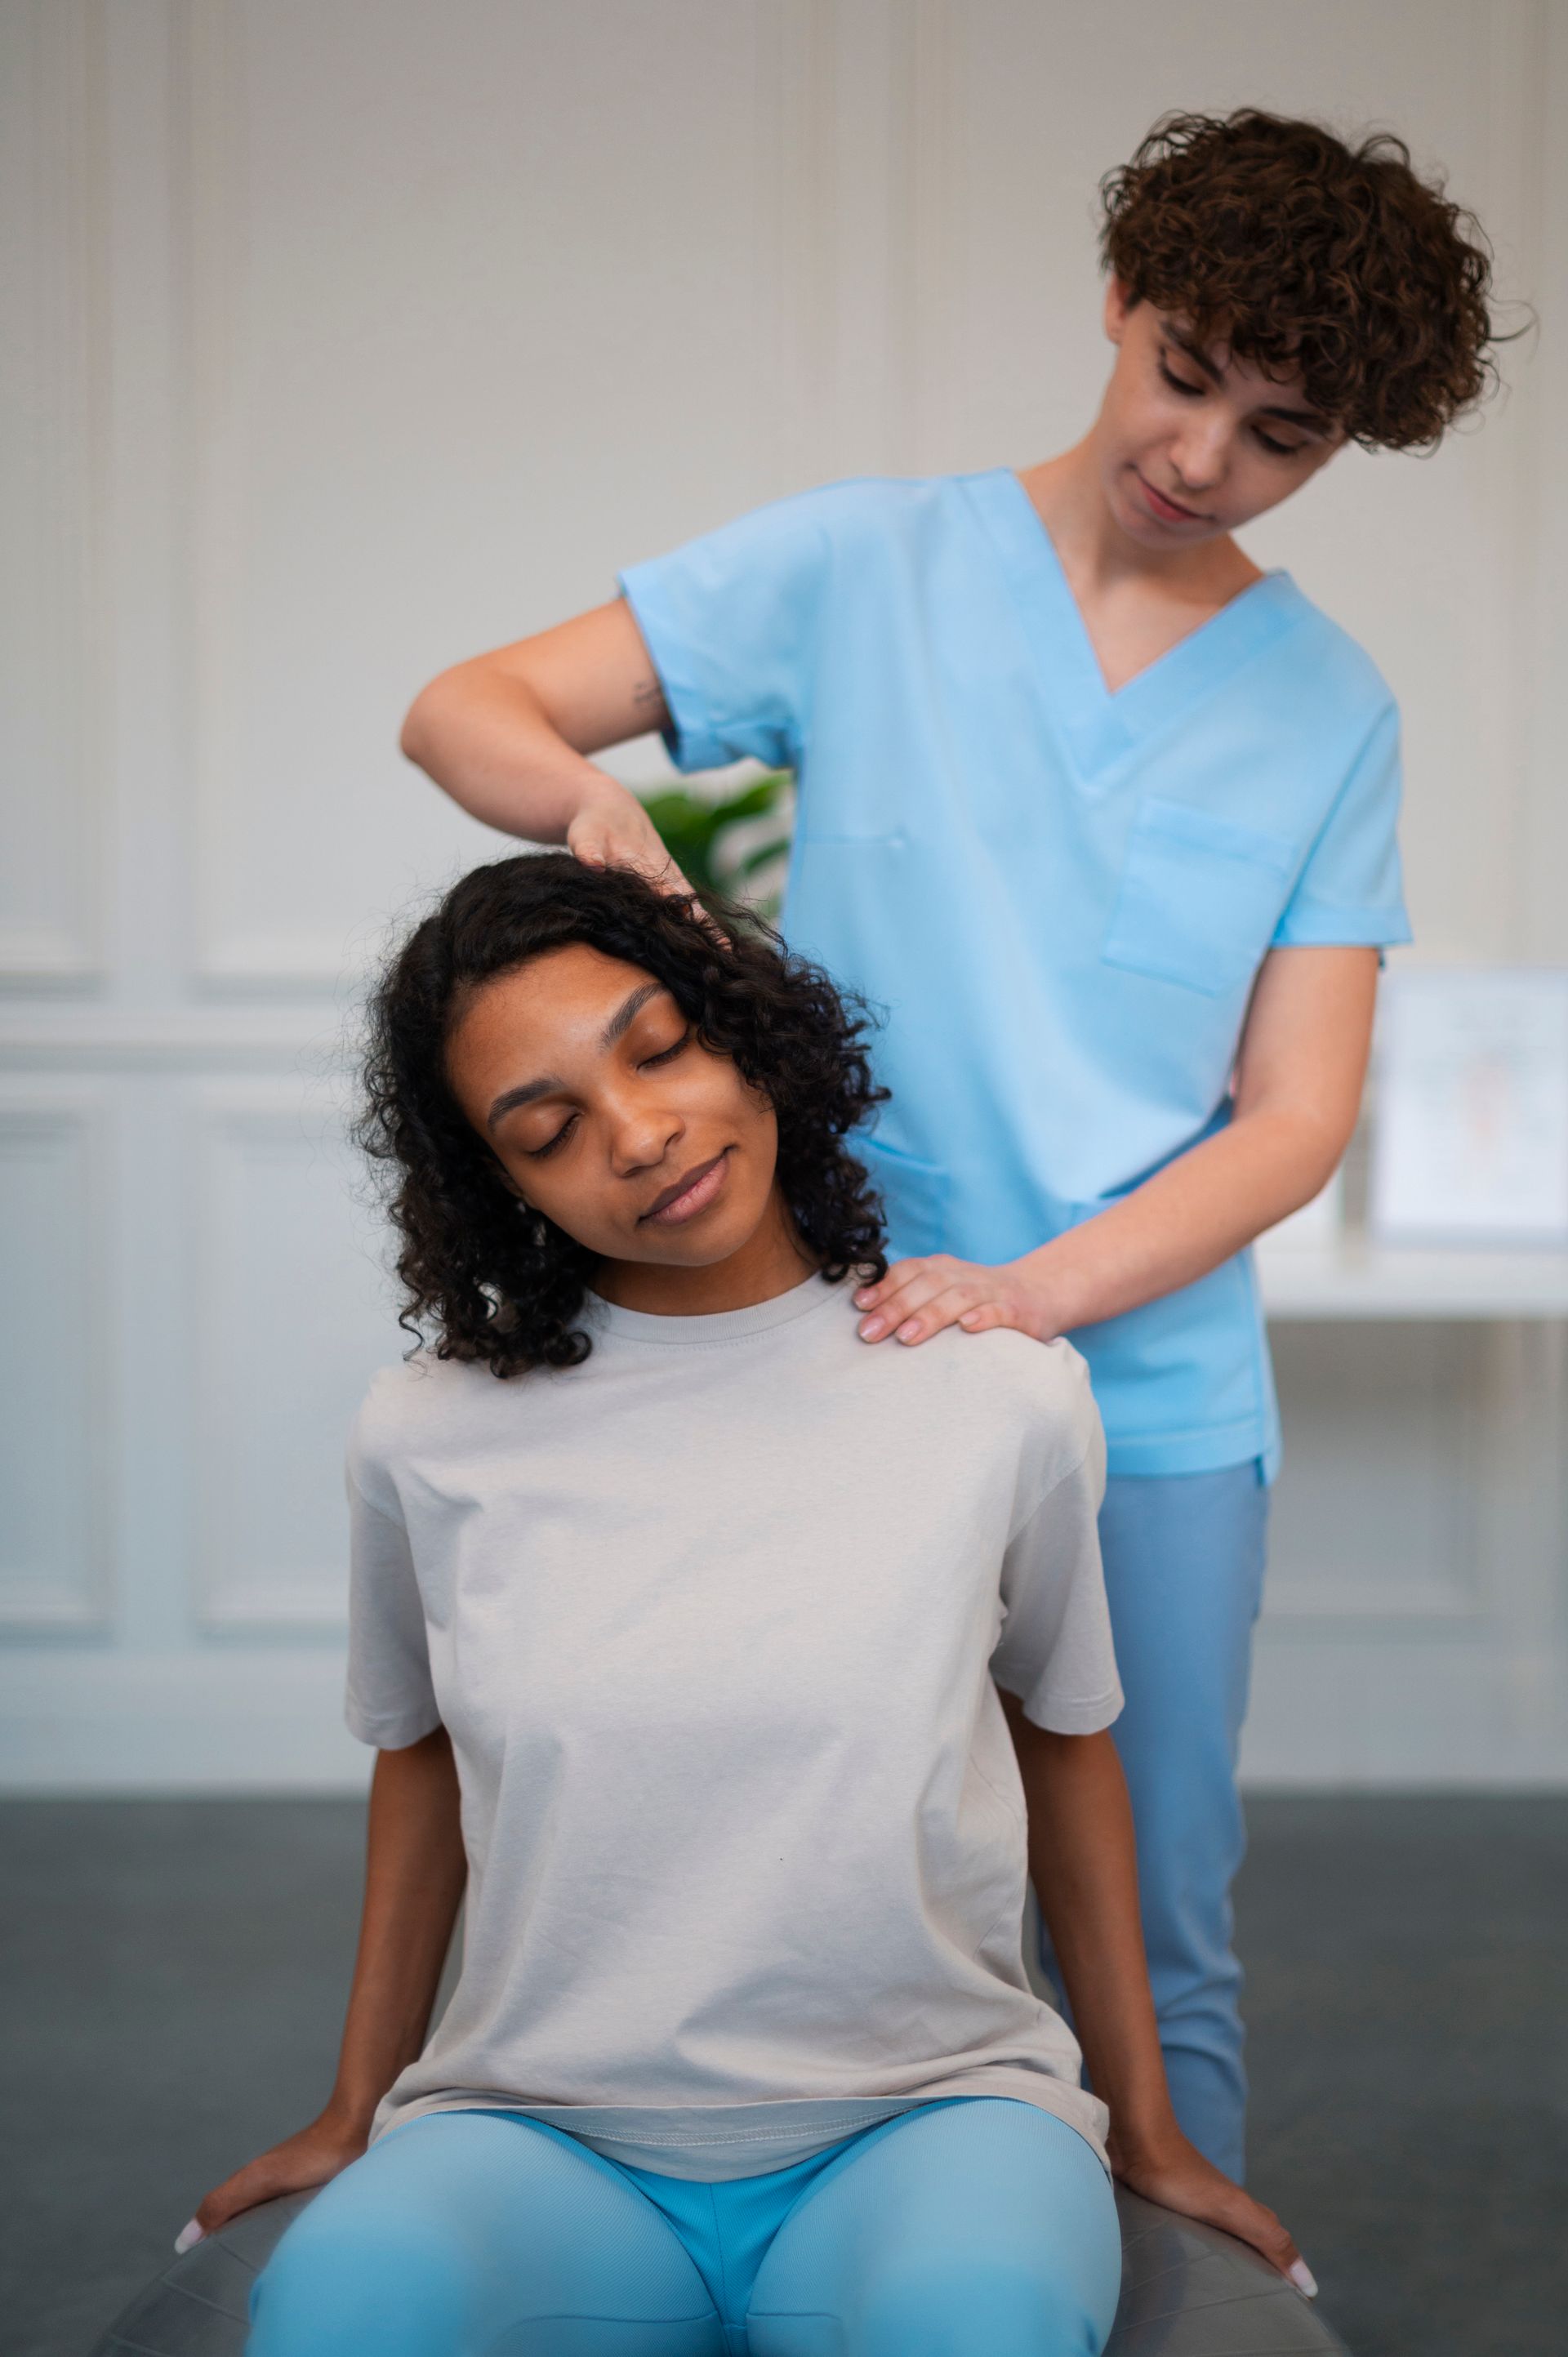 a woman in a white shirt is getting a massage from a woman in blue scrubs